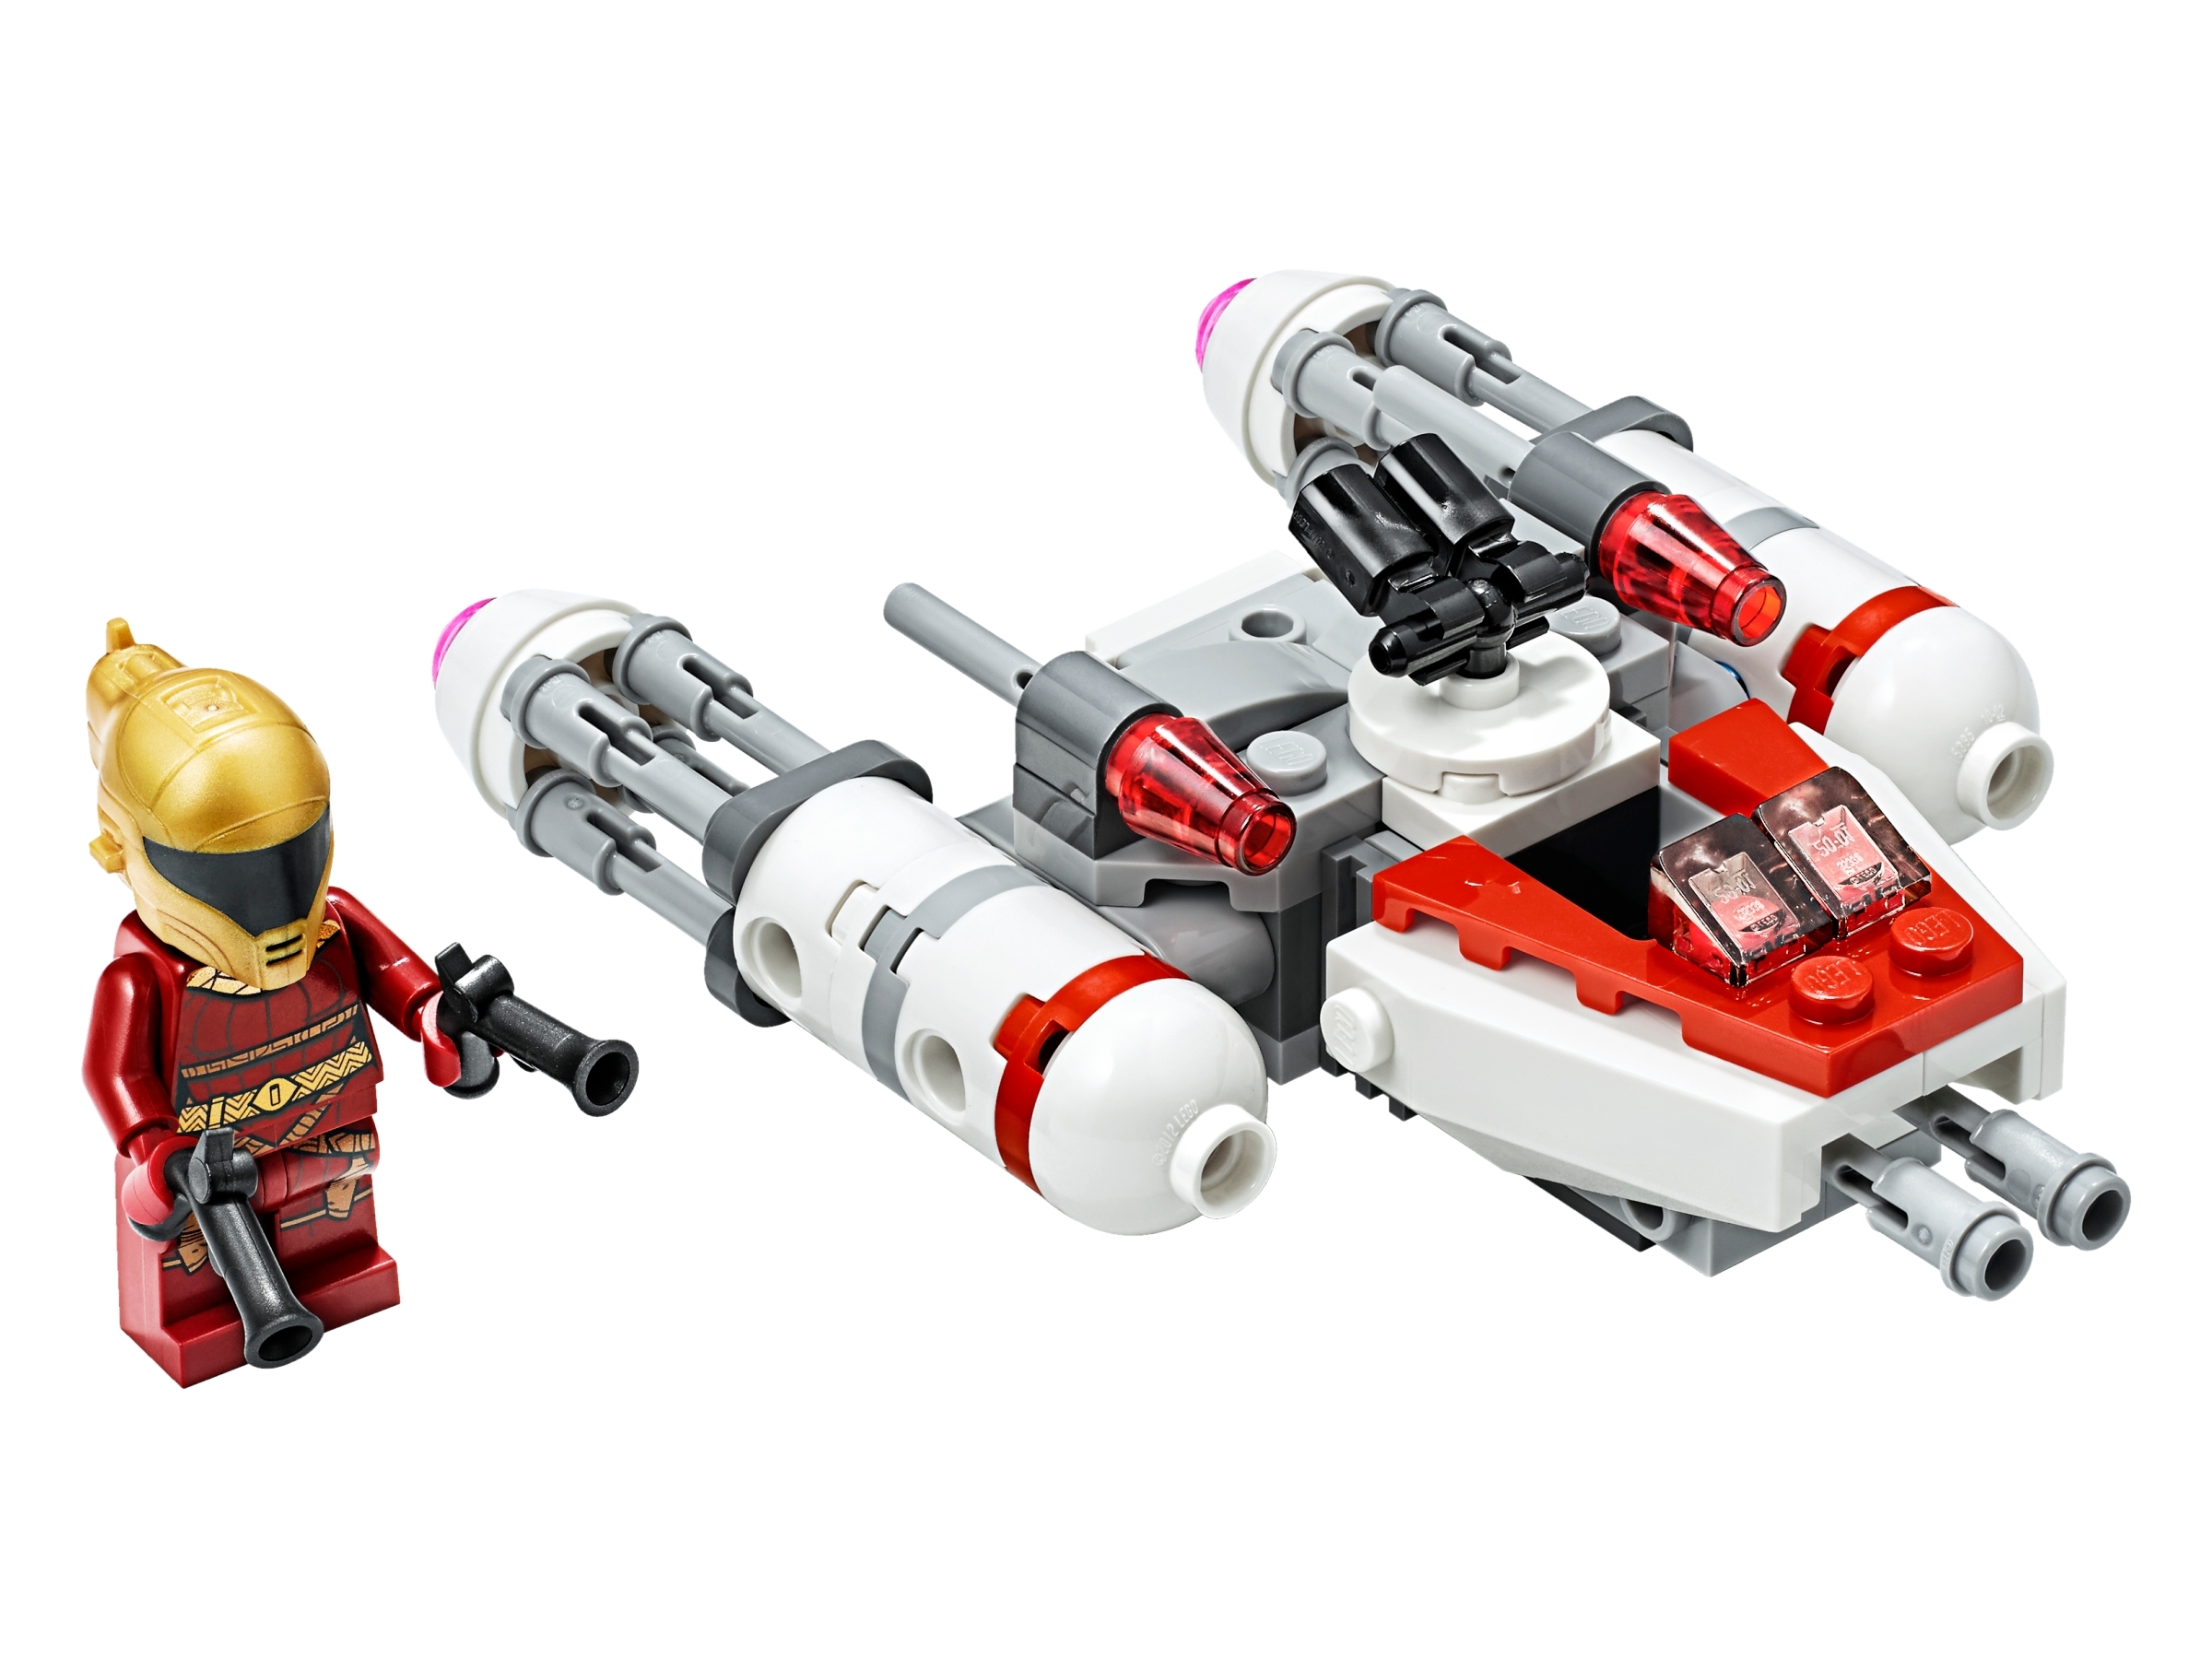 all lego star wars microfighters